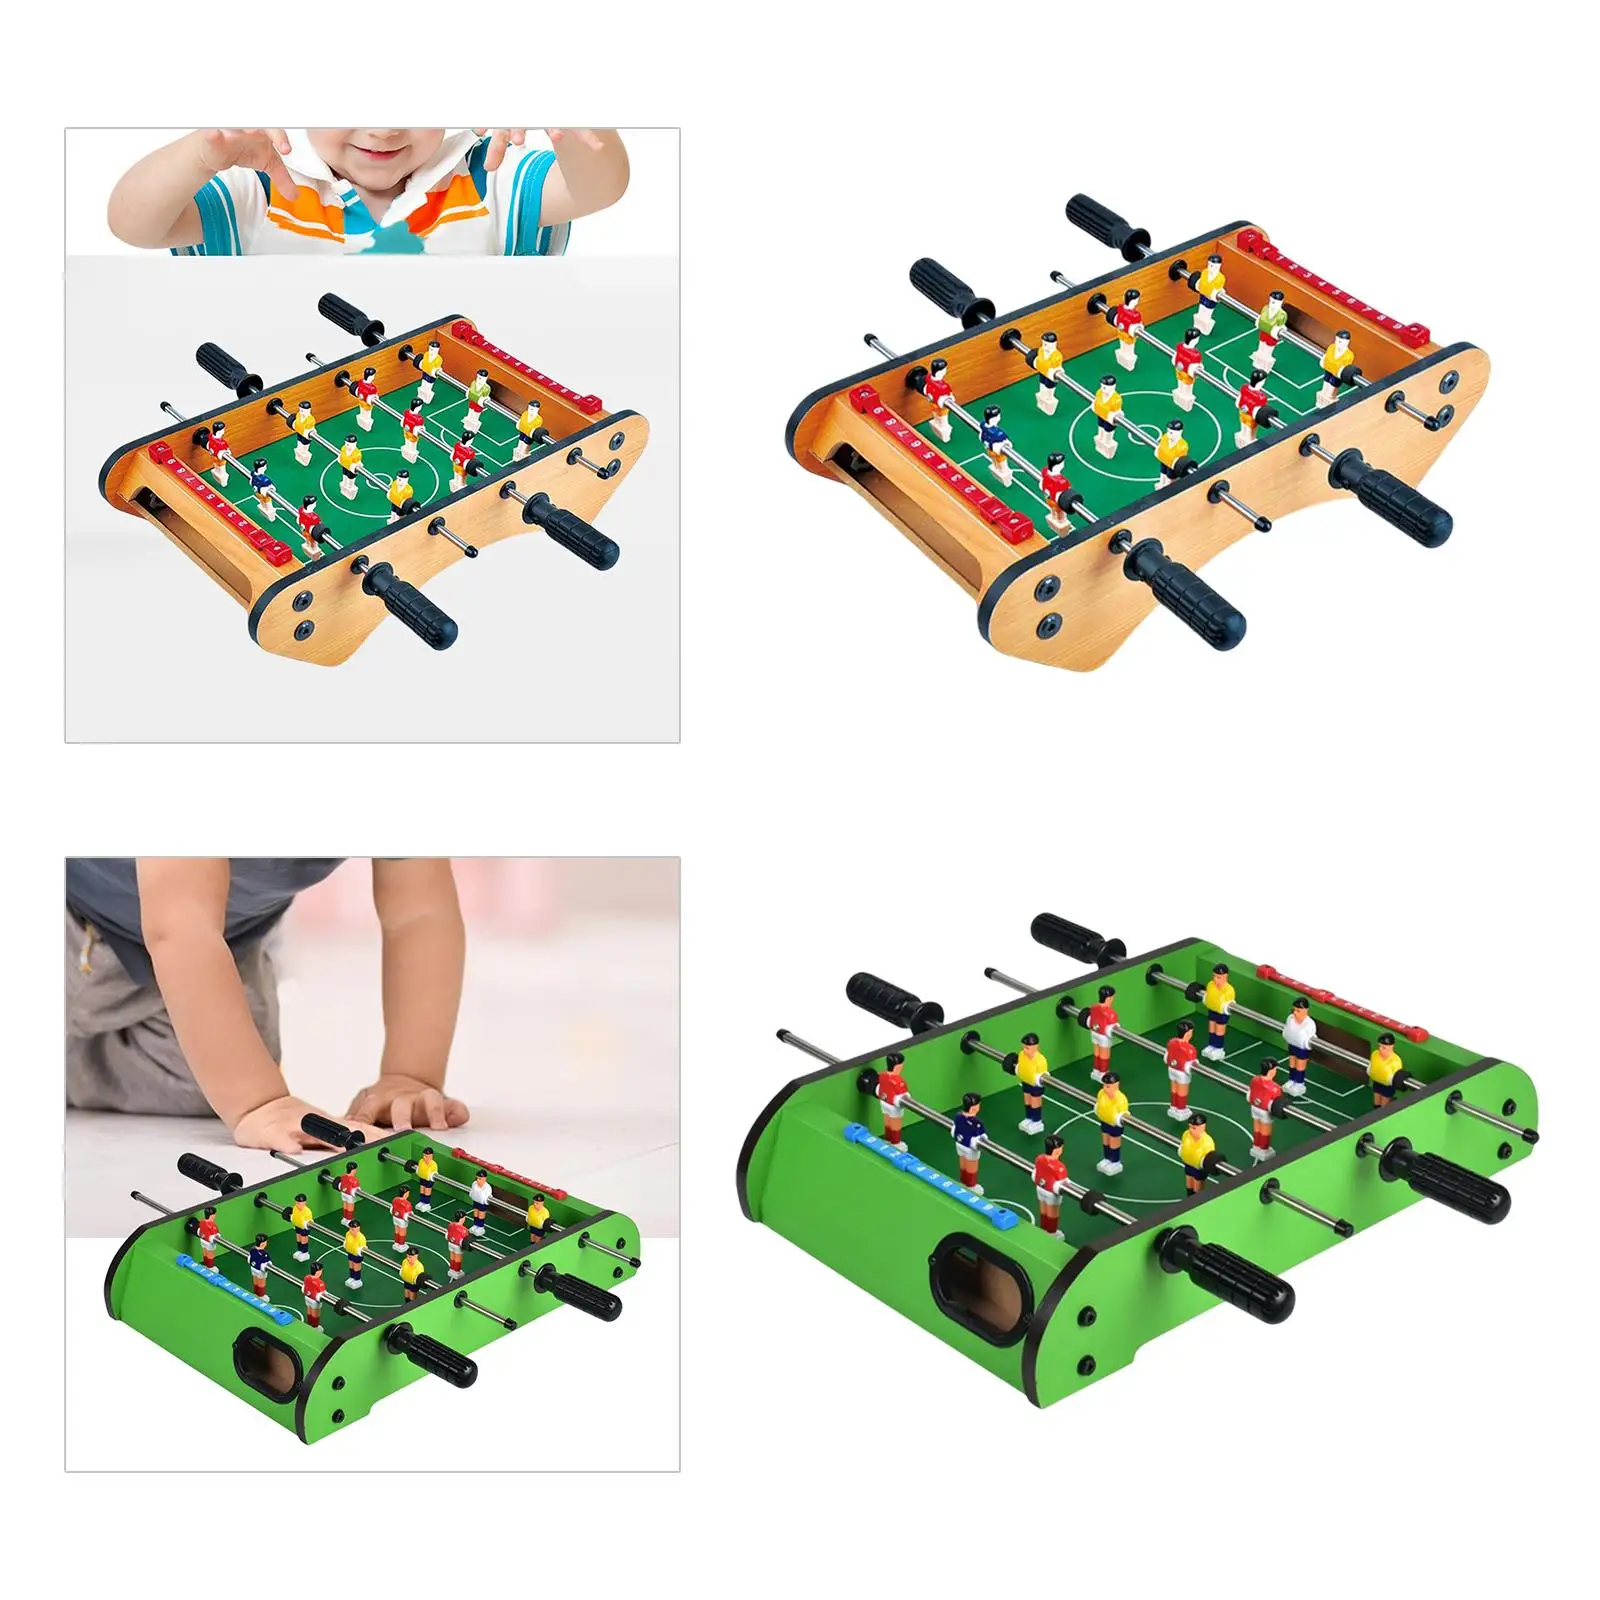 Wooden Tabletop Football Soccer Pinball Games Hands with Ball Interactive Toy Educational Toy Desktop Game for Sports Family